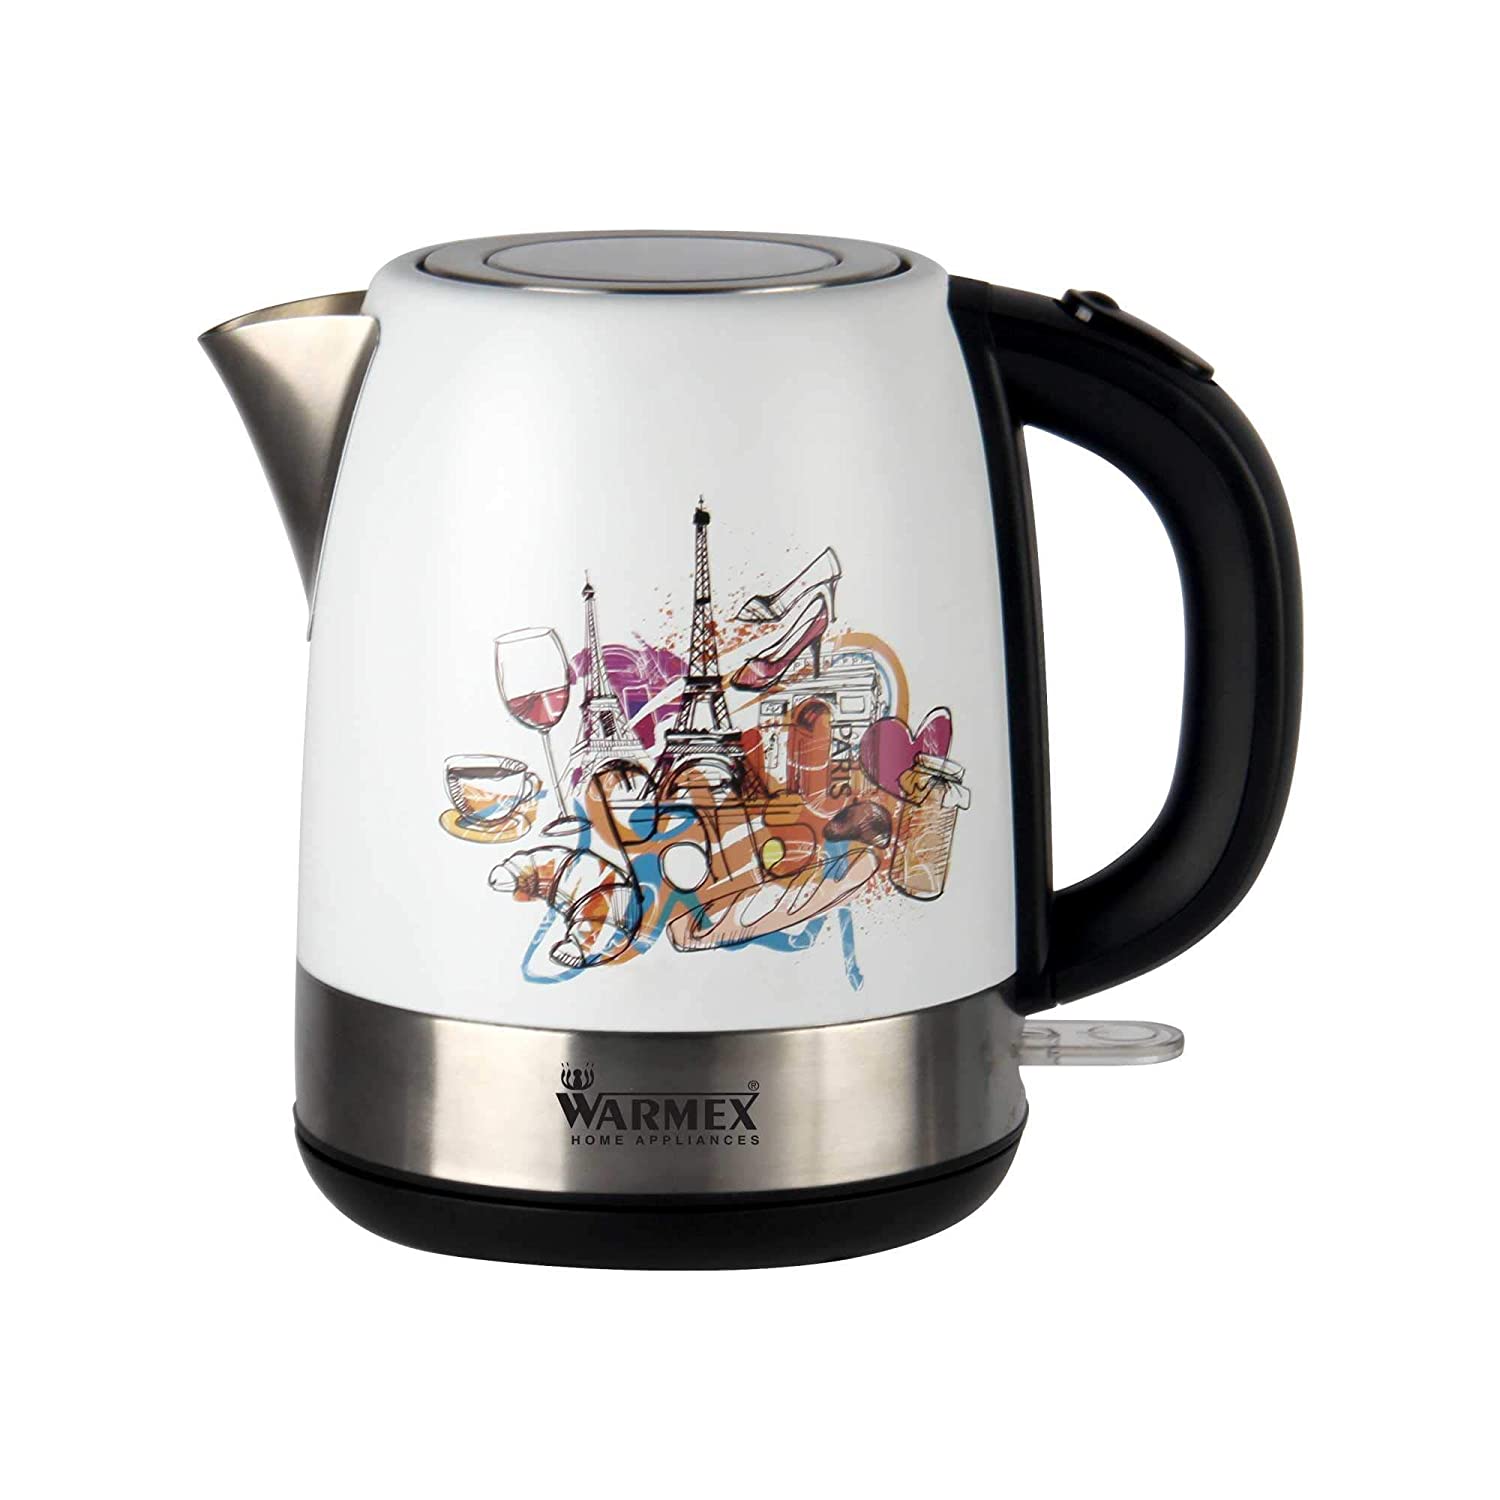 Warmex Stainless Steel Bonjour Electric Kettle